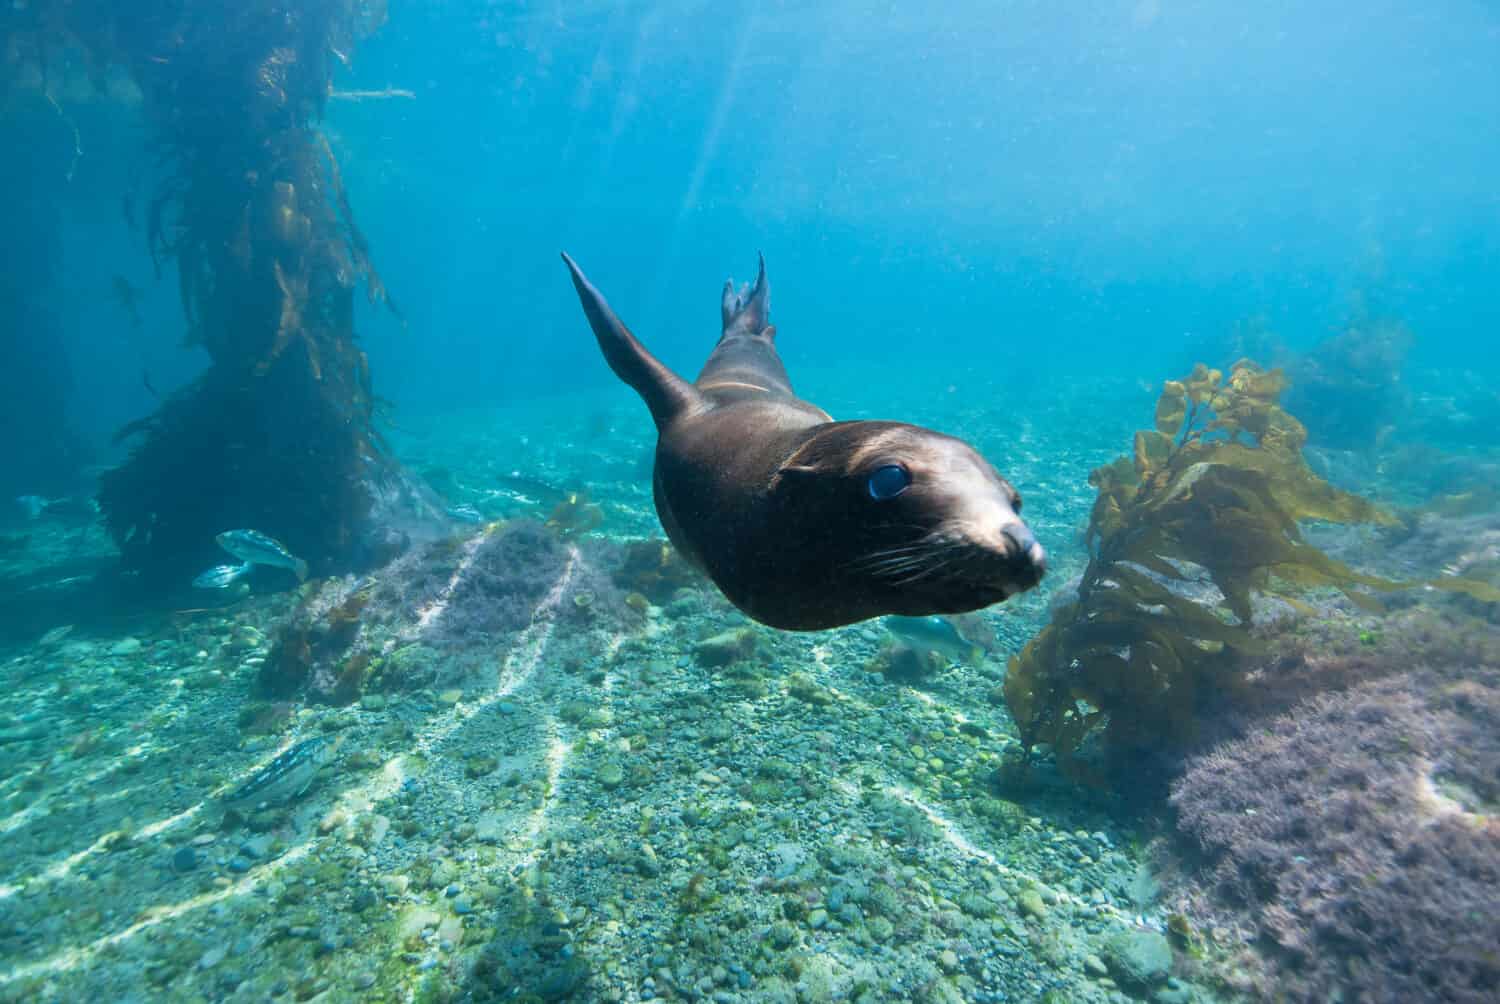 Young Sea Lion swimming around between giant kelp in a lagoon in blue water